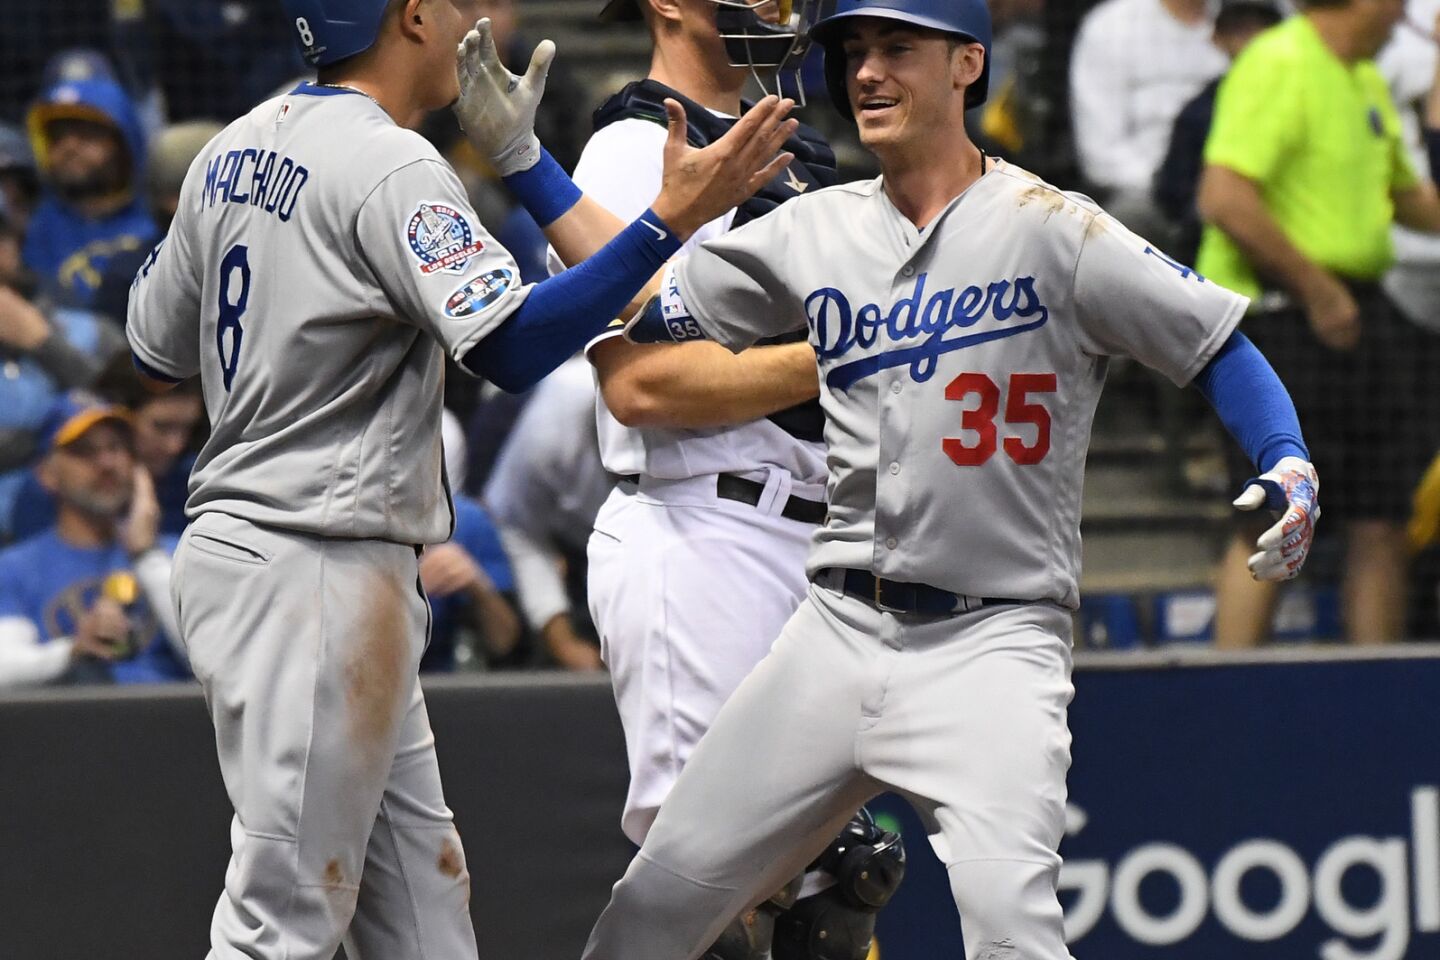 Dodgers Cody Bellinger celebrates with Manny Machado after hitting a two run homerun the second inning.